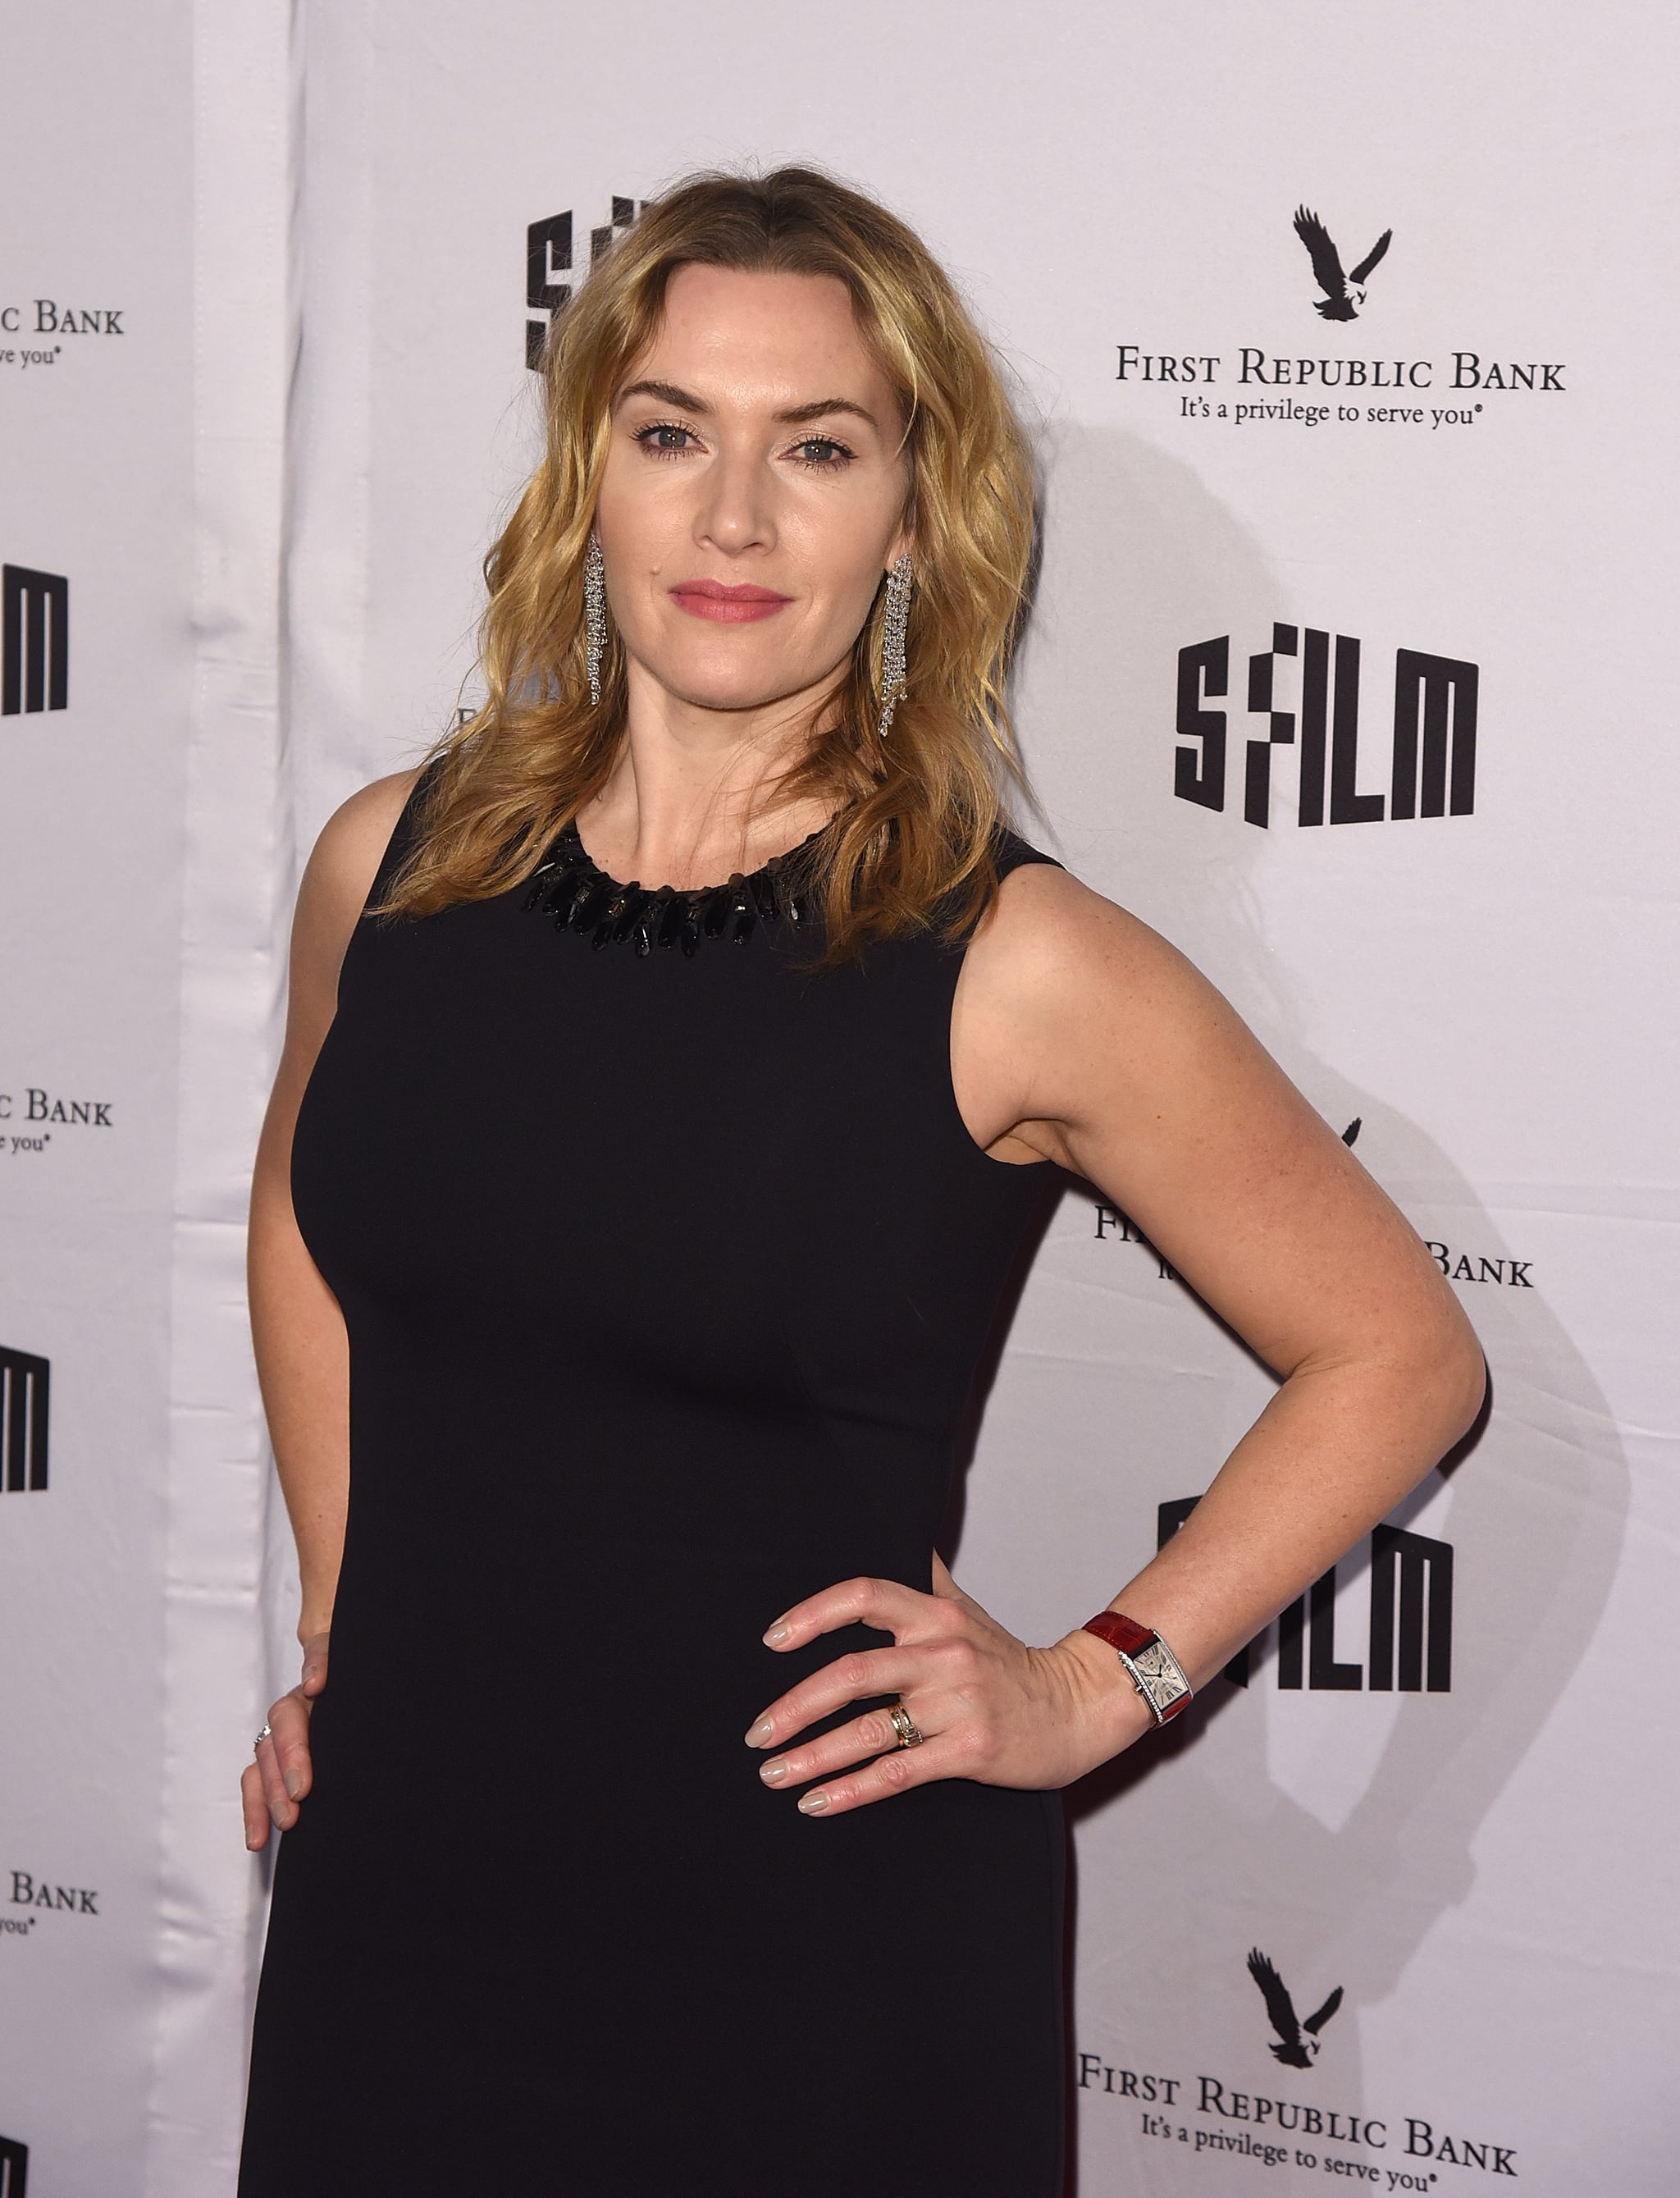 SAN FRANCISCO, CA - DECEMBER 05:  Kate Winslet attends SFFILM's 60th Anniversary Awards Night at Palace of Fine Arts Theatre on December 5, 2017 in San Francisco, California.  (Photo by C Flanigan/Getty Images)